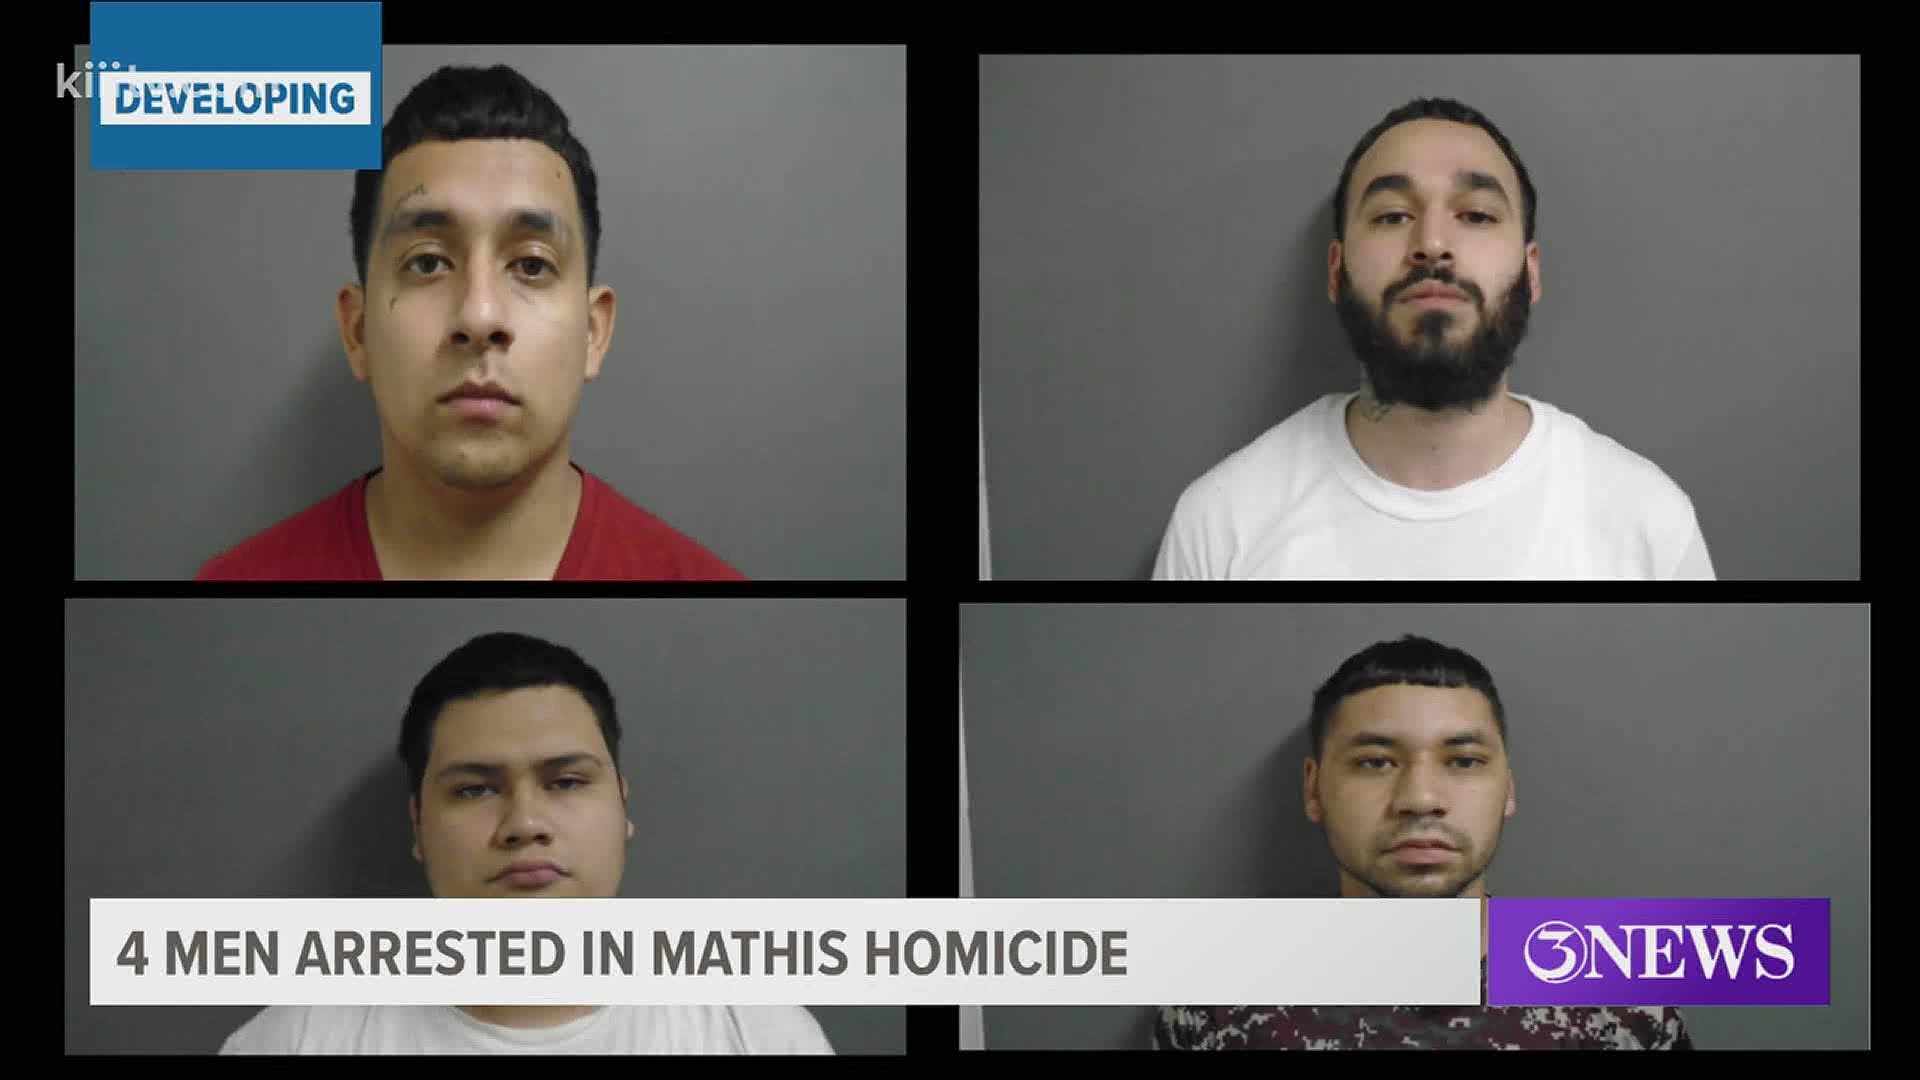 Officials say all four suspects have been charged with Capital Murder.